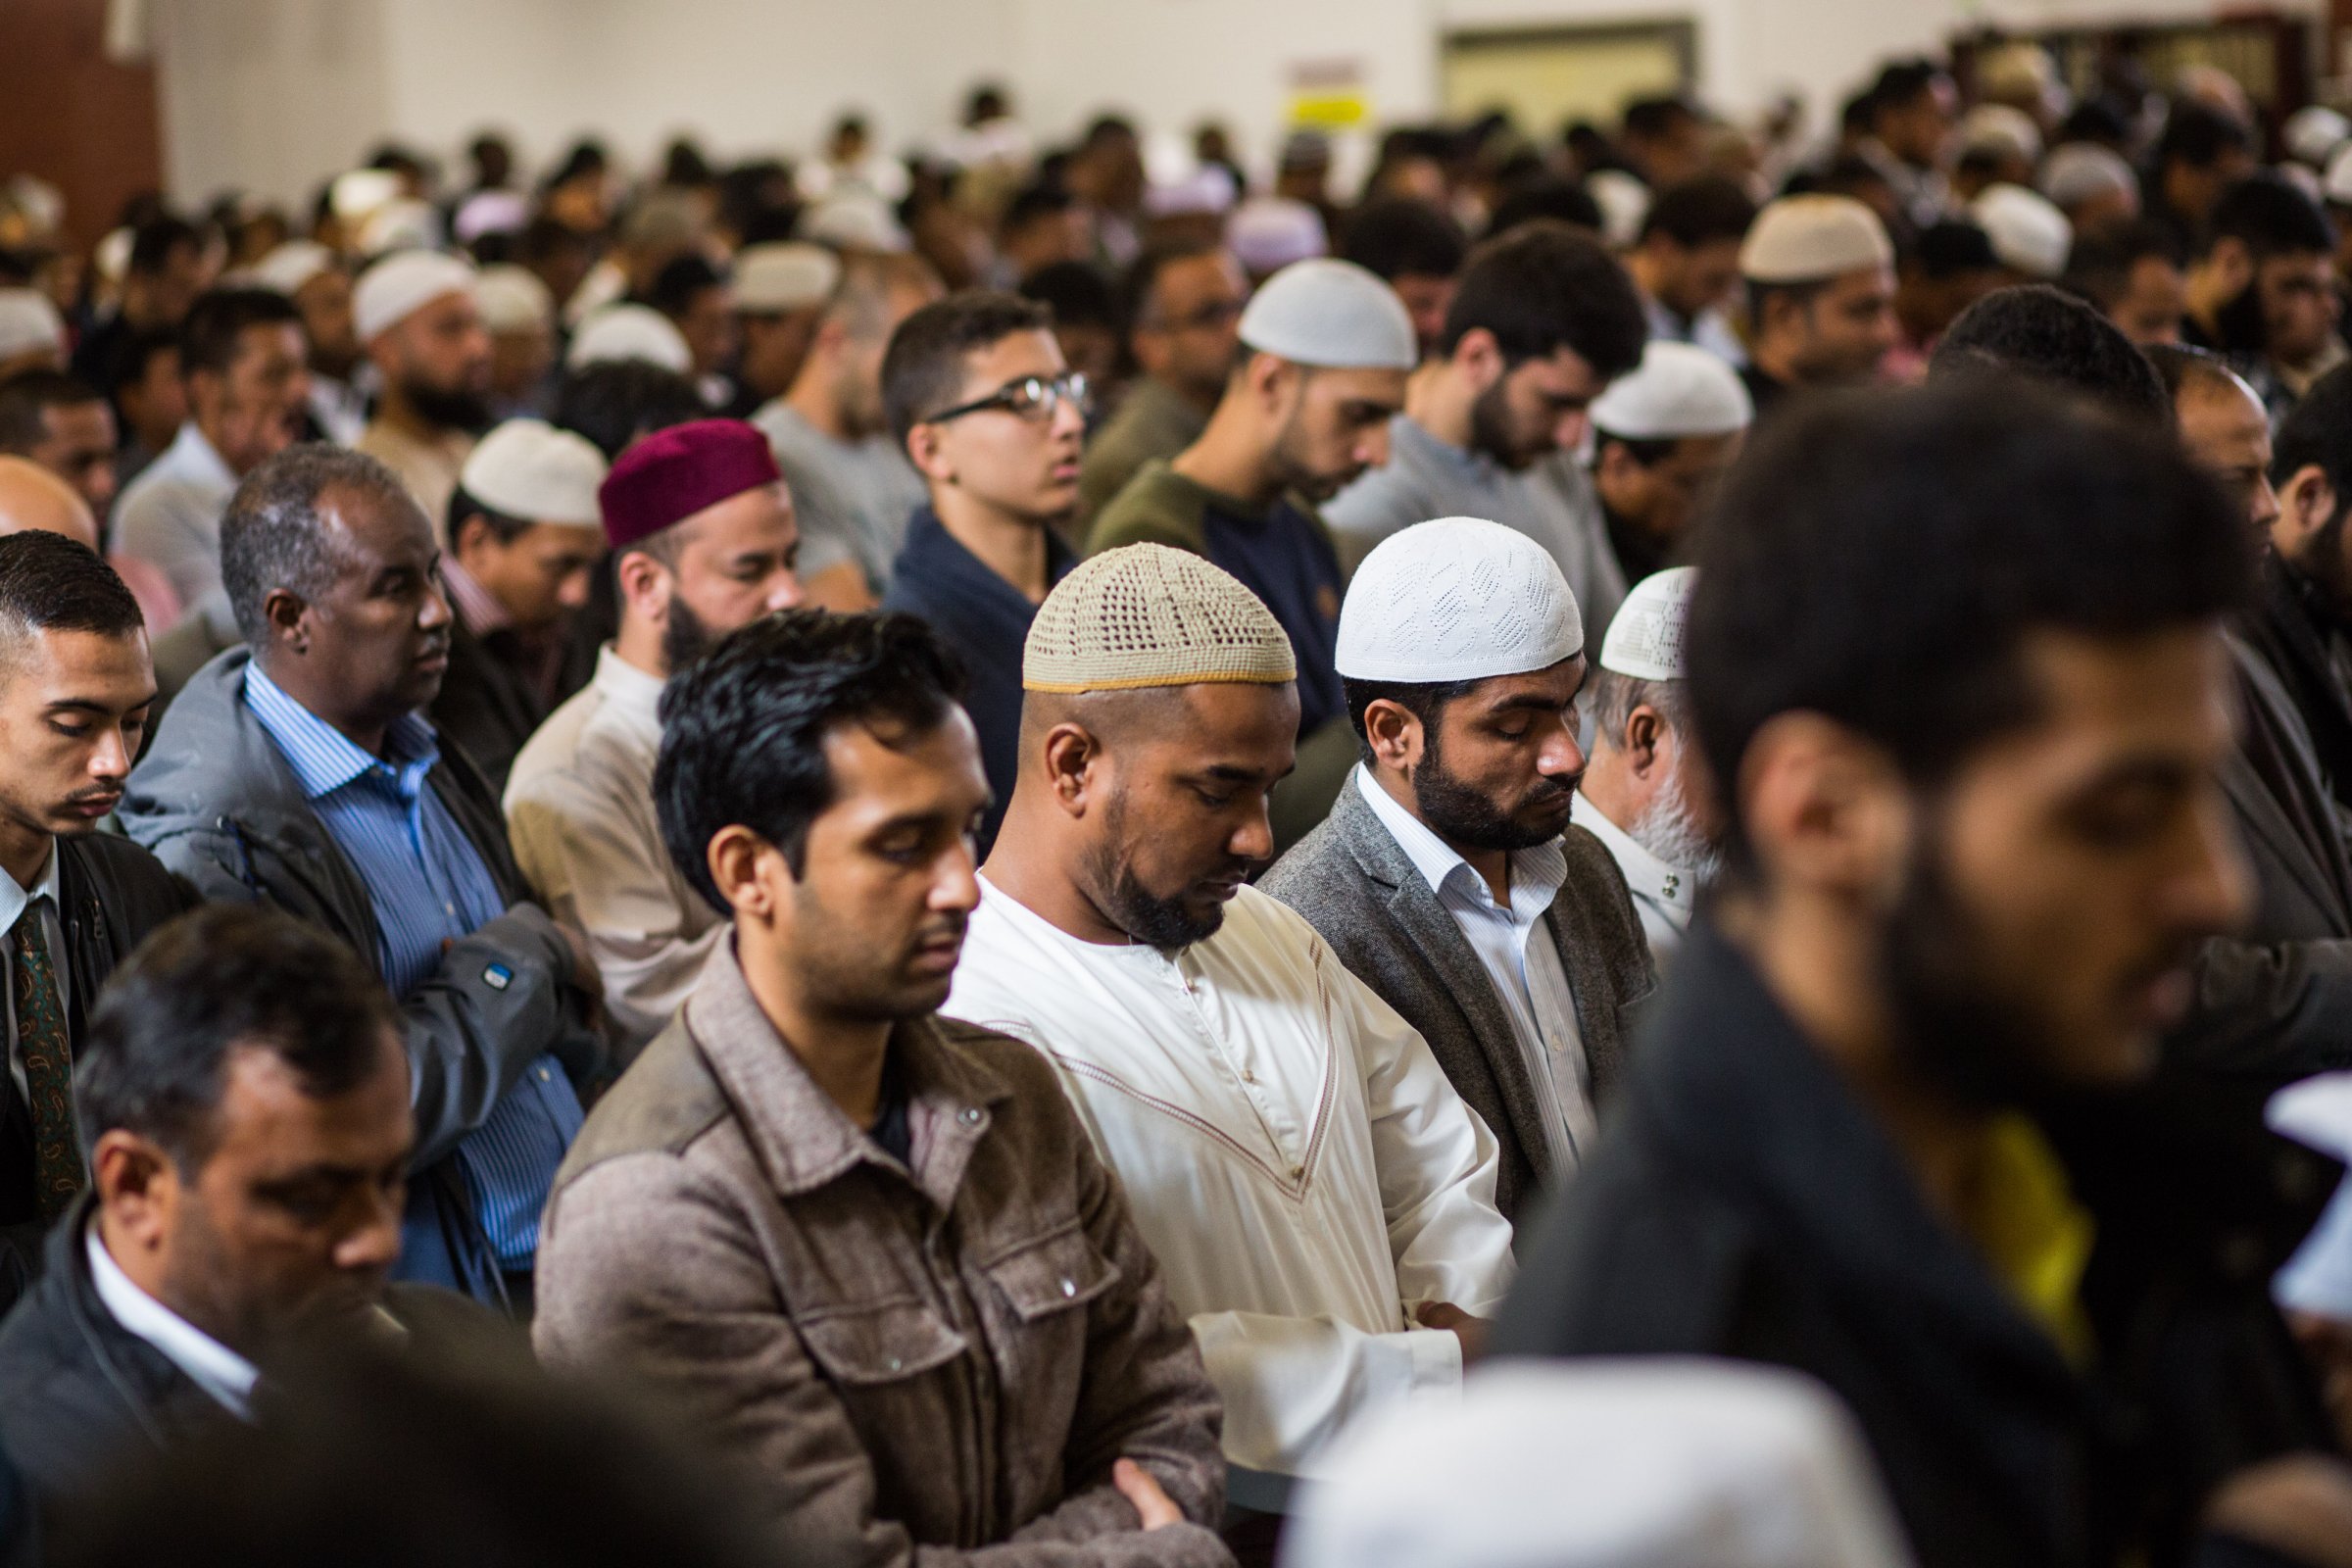 Men attend the first Friday prayers of the Islamic holy month of Ramadan at the East London Mosque on June 19, 2015 in London, England.